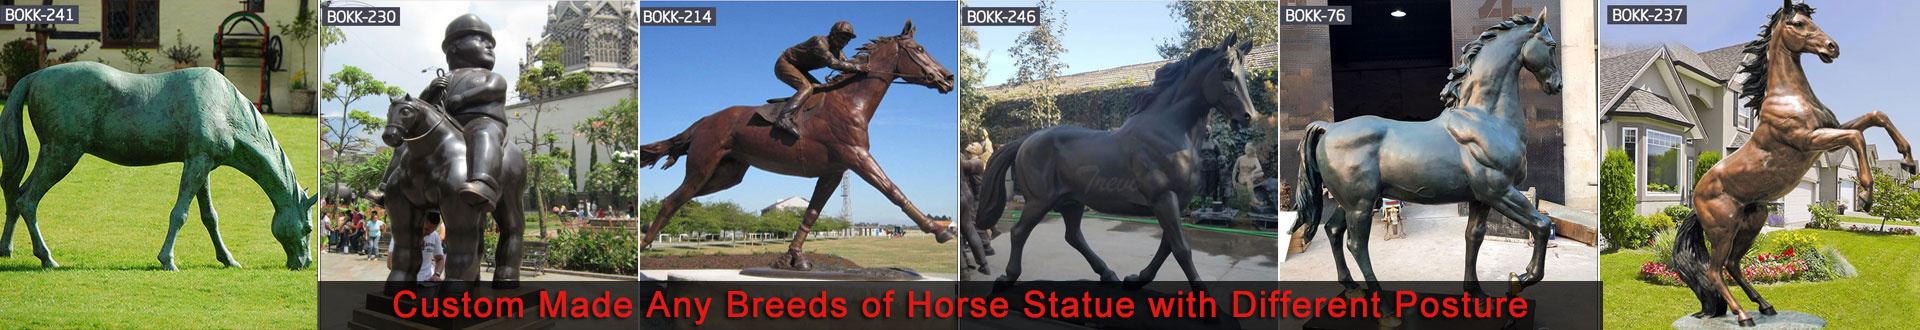 life size bronze horse statues for sale sculptures of people on horses